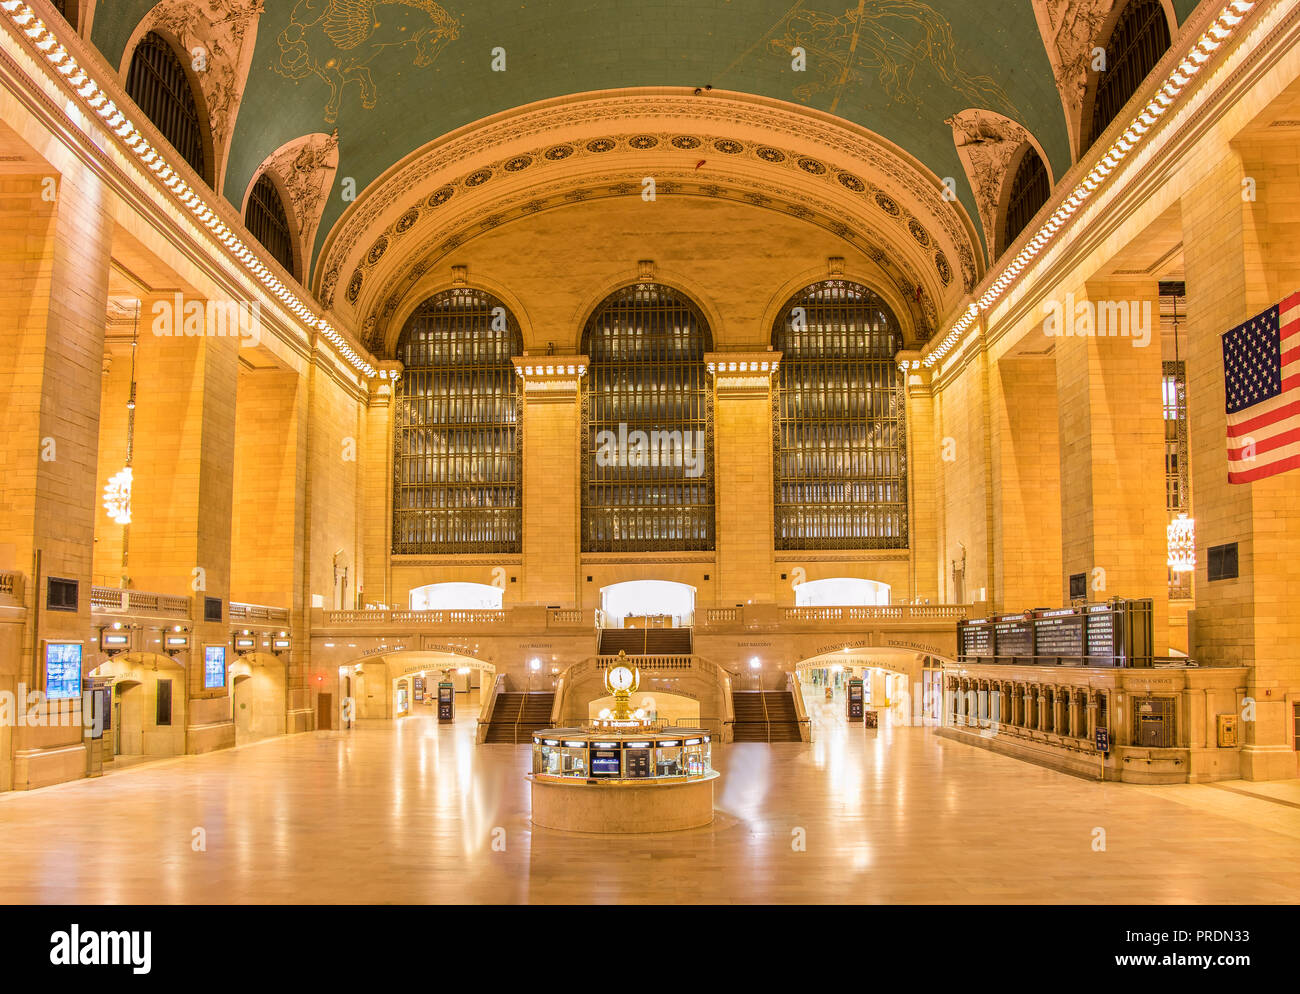 New York City, USA - June 12, 2017: View of the Grand Central Station at night. Stock Photo